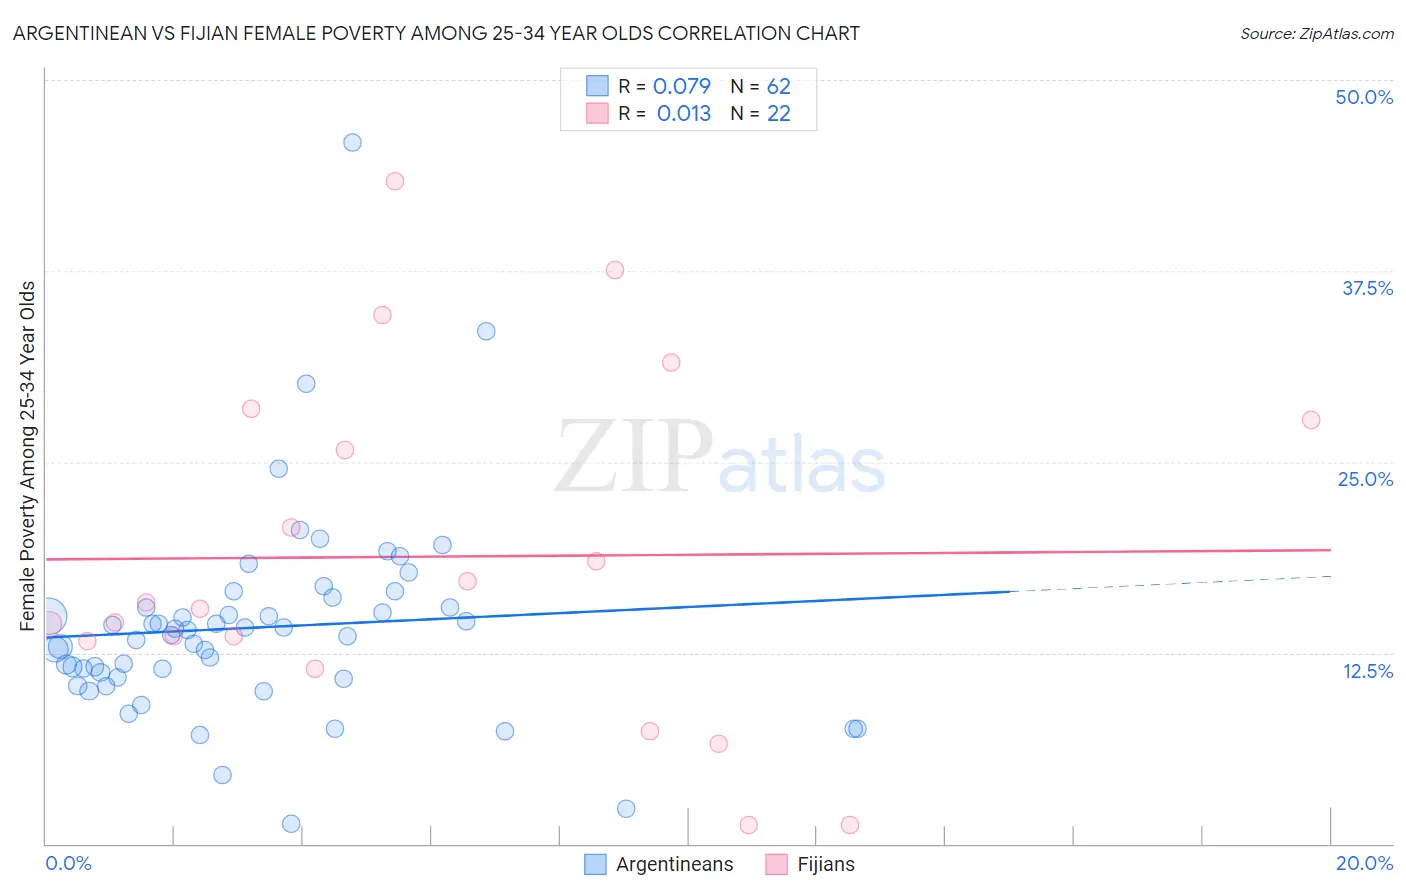 Argentinean vs Fijian Female Poverty Among 25-34 Year Olds